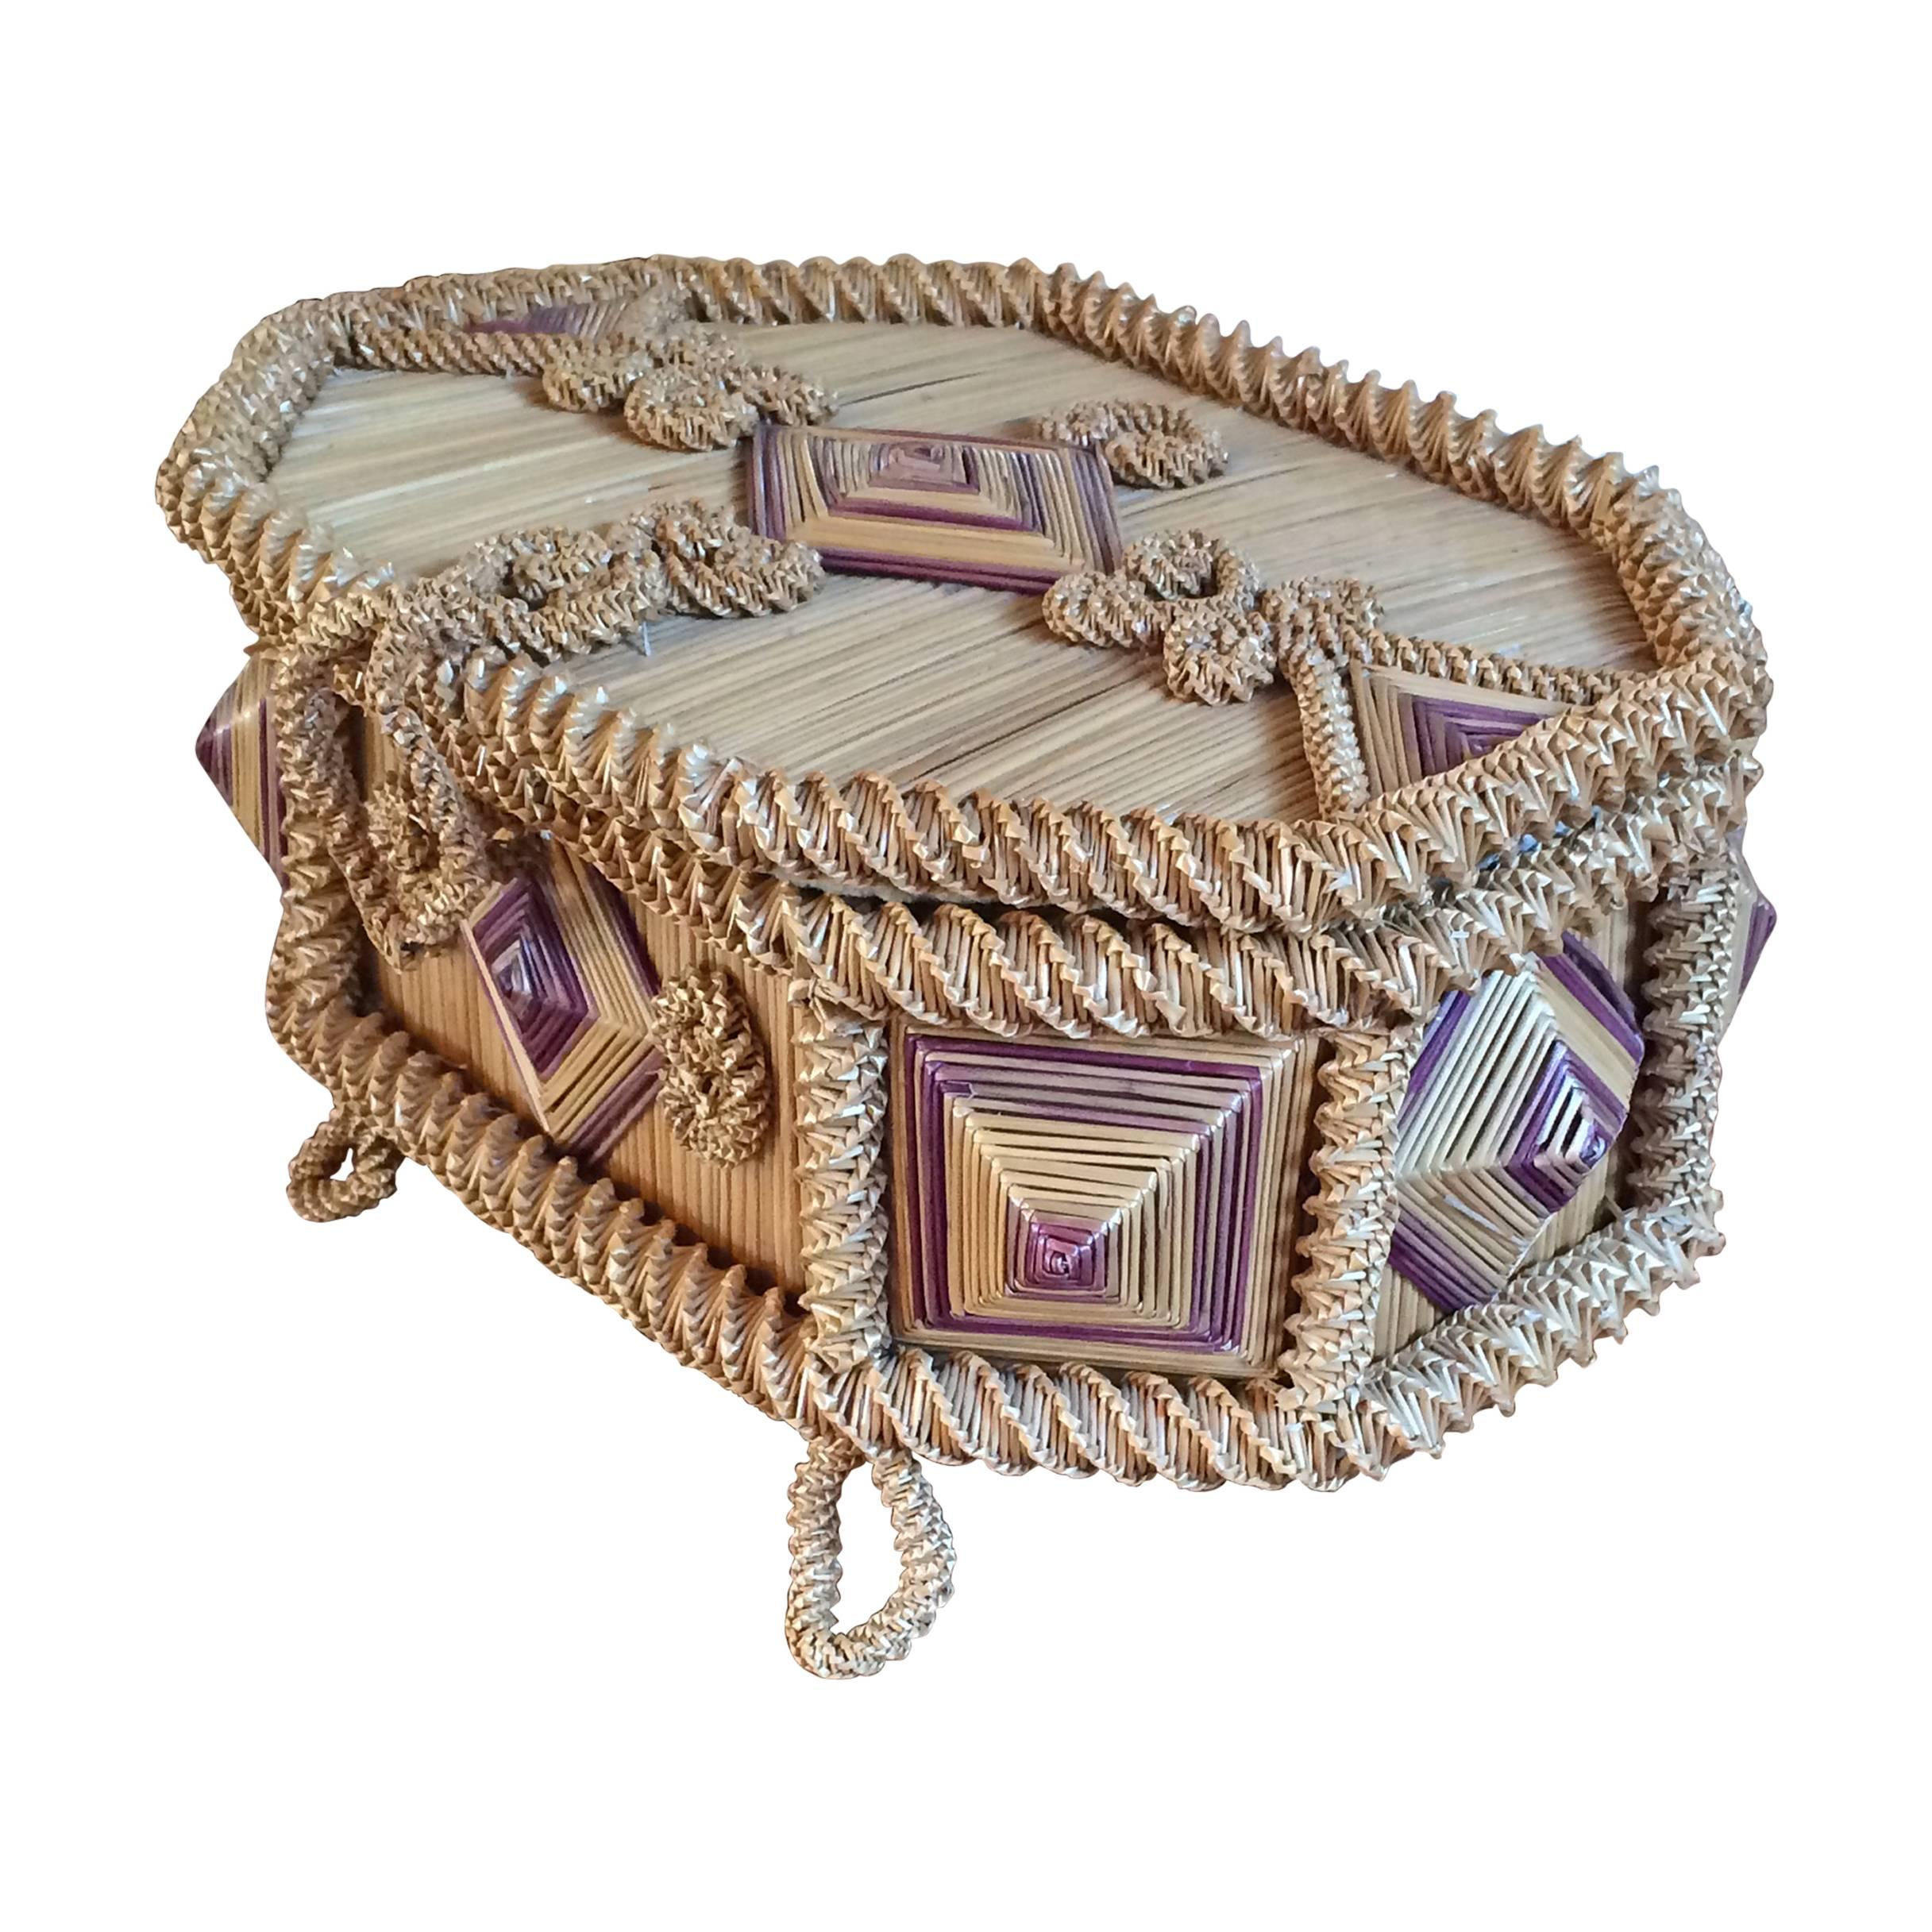 Very unusual octagonal French woven straw; raised applique sewing box; velvet lined interior, 19th century. Excellent condition.